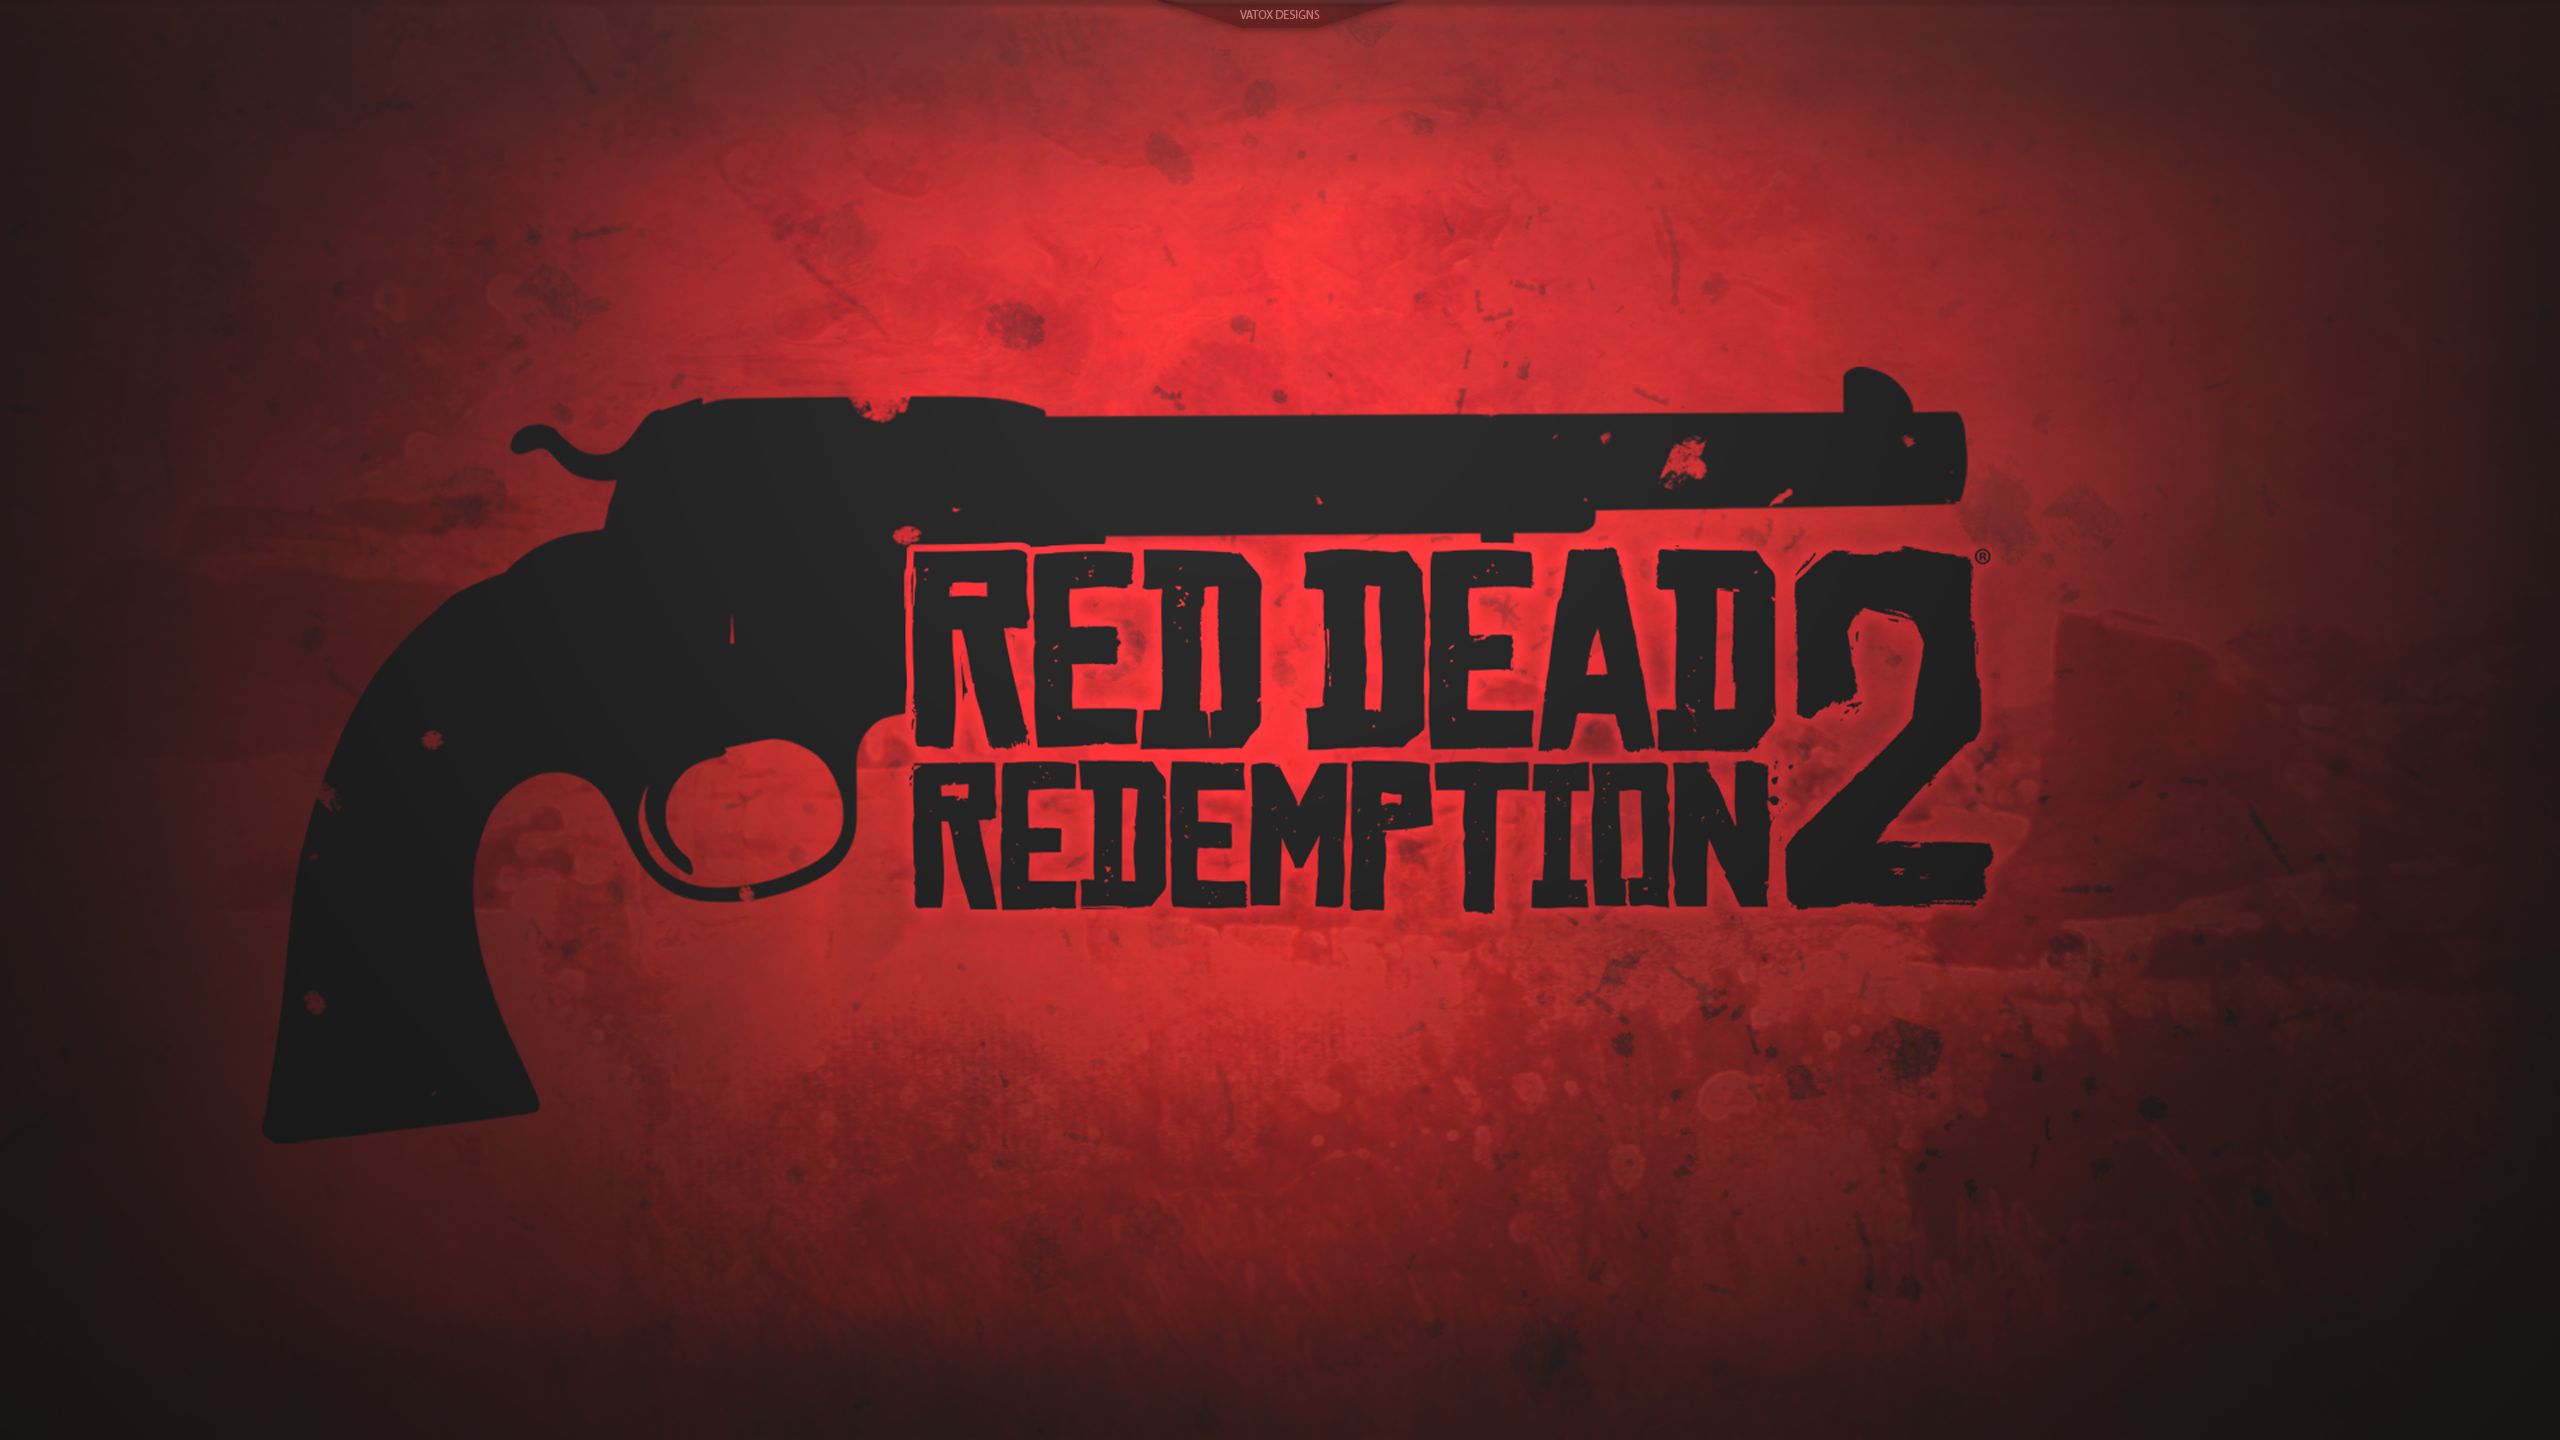 red dead redemption 2, video game, red dead